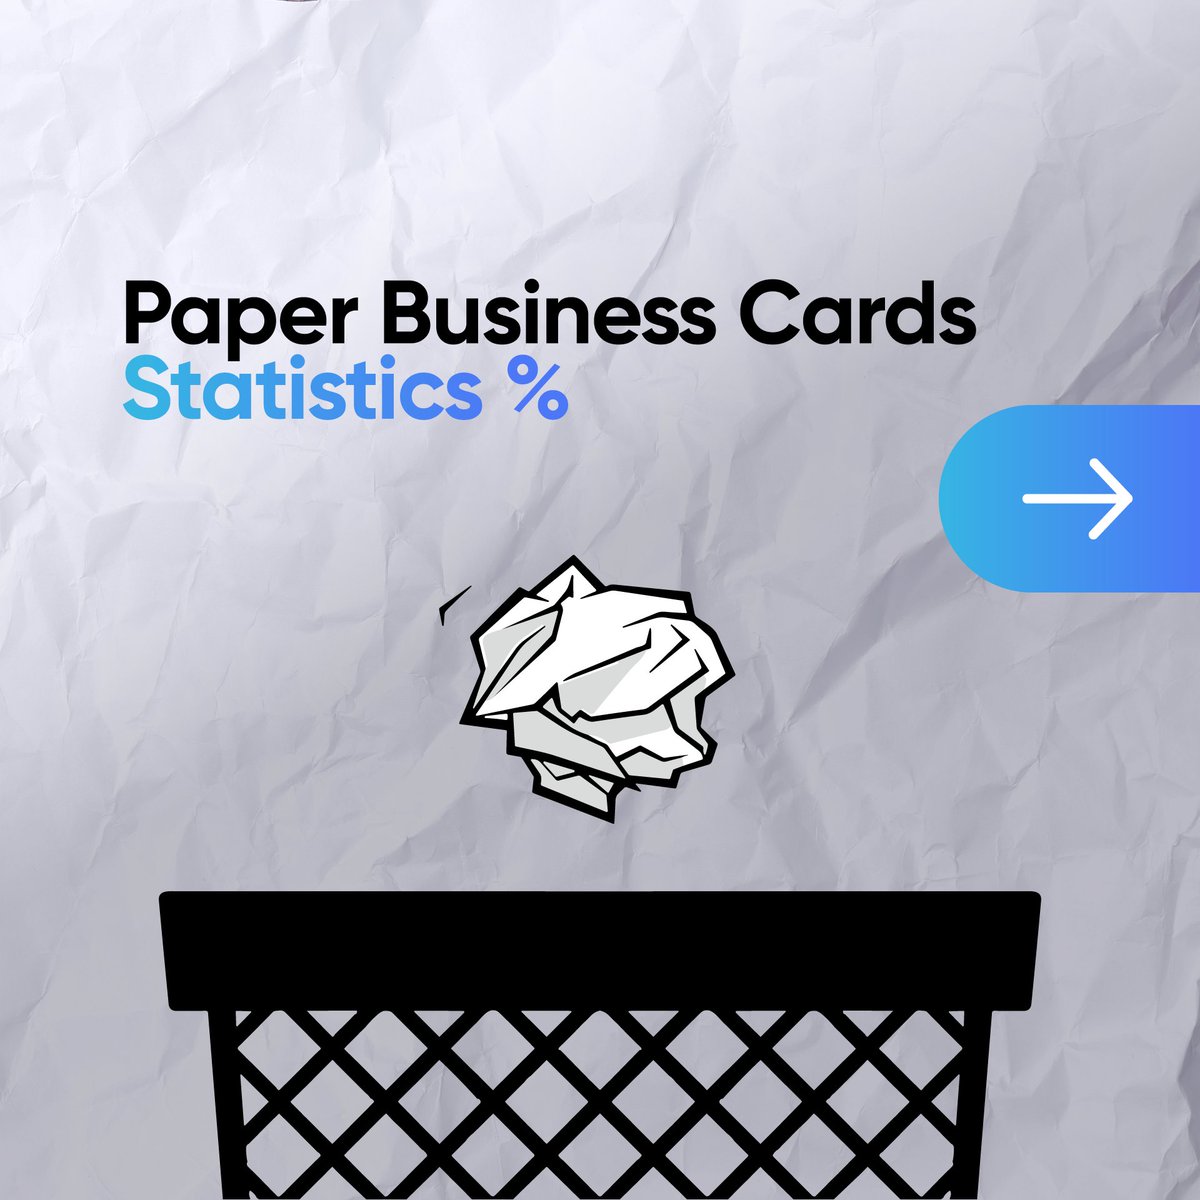 Tap link to unveil the shocking truth about paper business cards! 

📉Did you know 88% are tossed within a week? 
Quality, color, and accuracy matter more than ever. #BusinessCards #FirstImpressions Click here: loom.ly/b3iKDJU